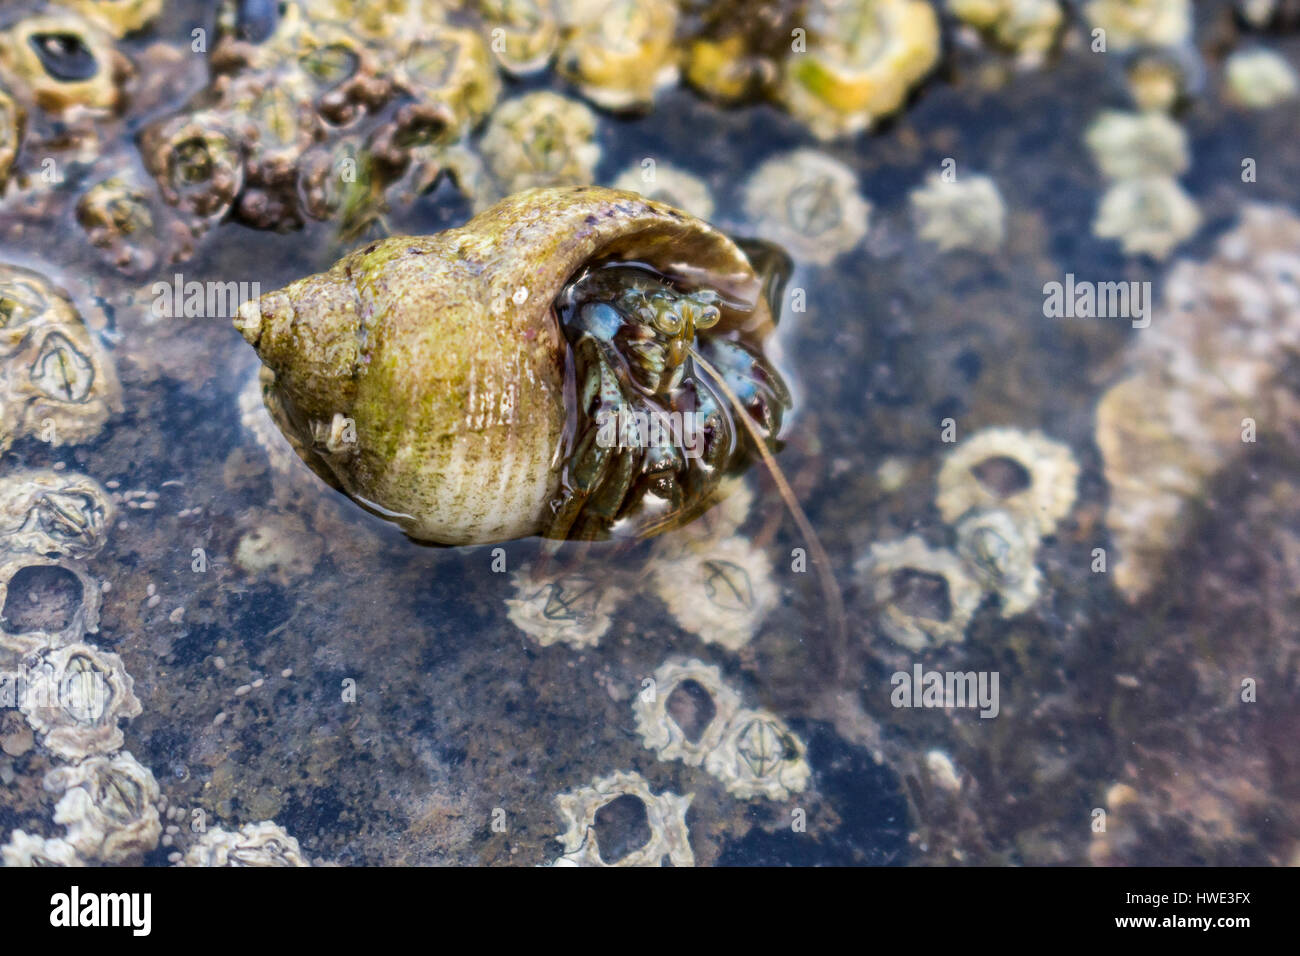 Common Hermit Crab Showing Head and claws coming out of shell at Rascarrel Bay, Dumfries and Galloway, Scotland, UK. Stock Photo